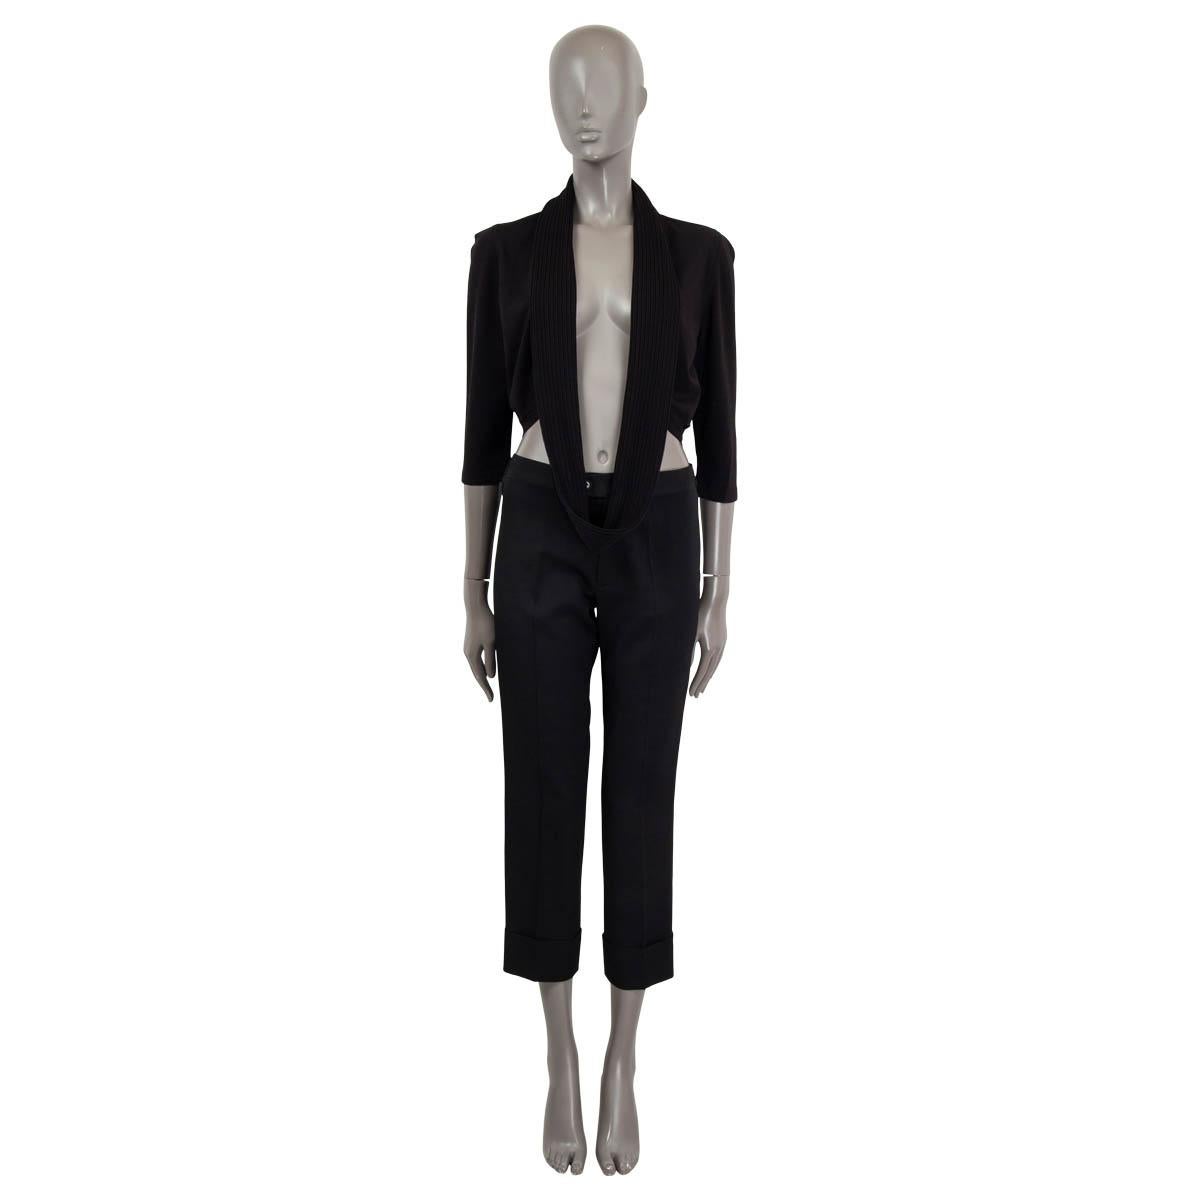 100% authentic Chanel 3/4 sleeve cropped bolero jacket in black viscose (100%) features an attached rib shawl around the waist or can be worn around the neck. Has been worn and is in excellent condition. 

Measurements
Model	Chanel06C P27610
Tag